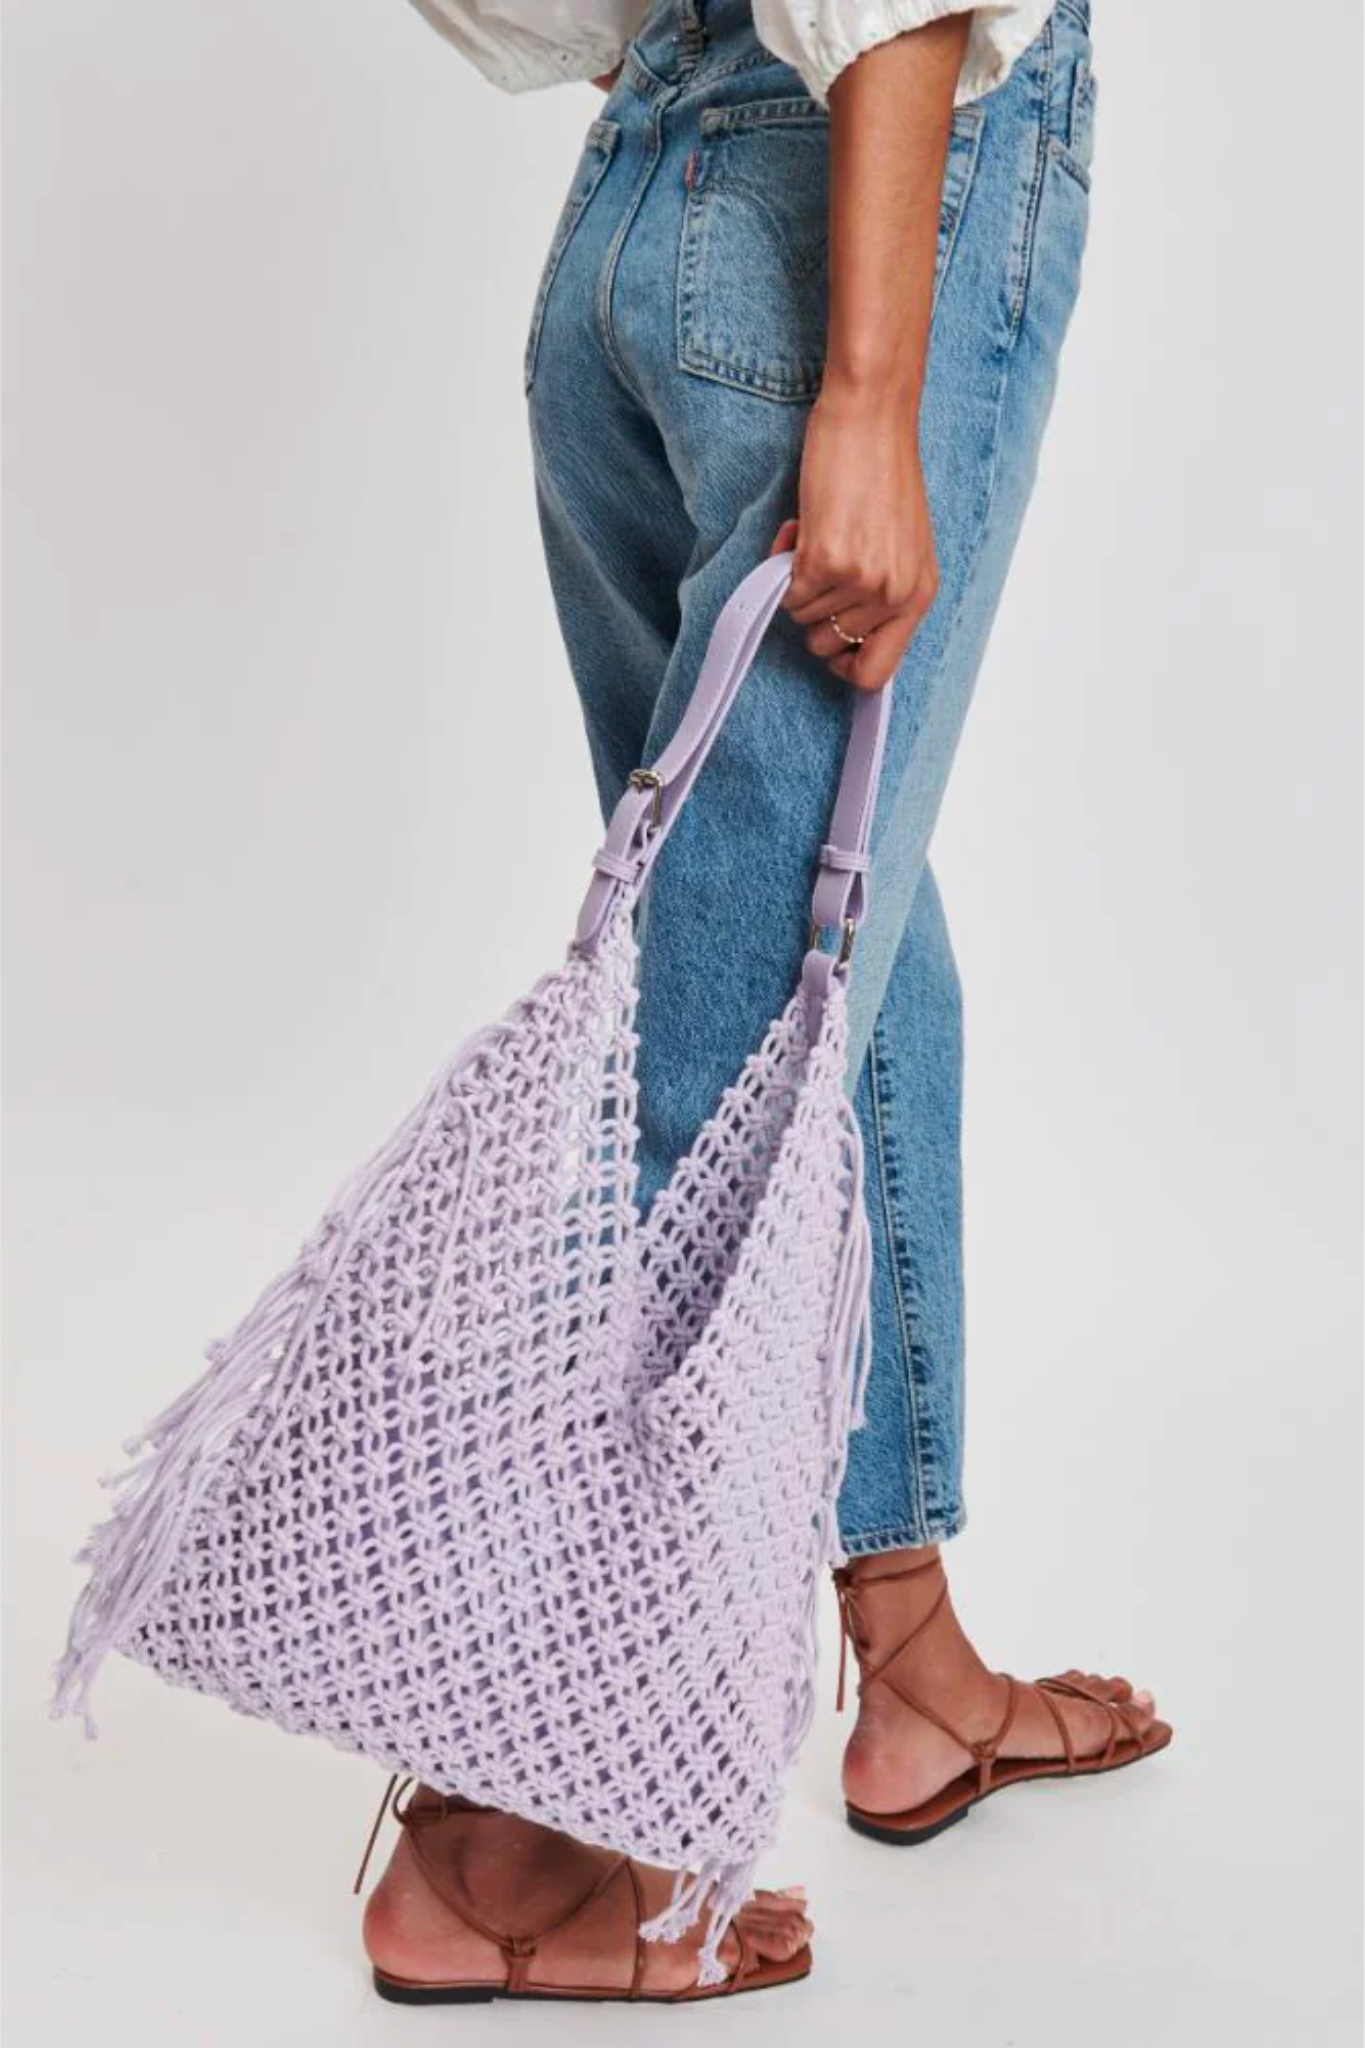 View 5 of Ariel Crochet Hobo Bag in Lilac, a Bags from Larrea Cove. Detail: .